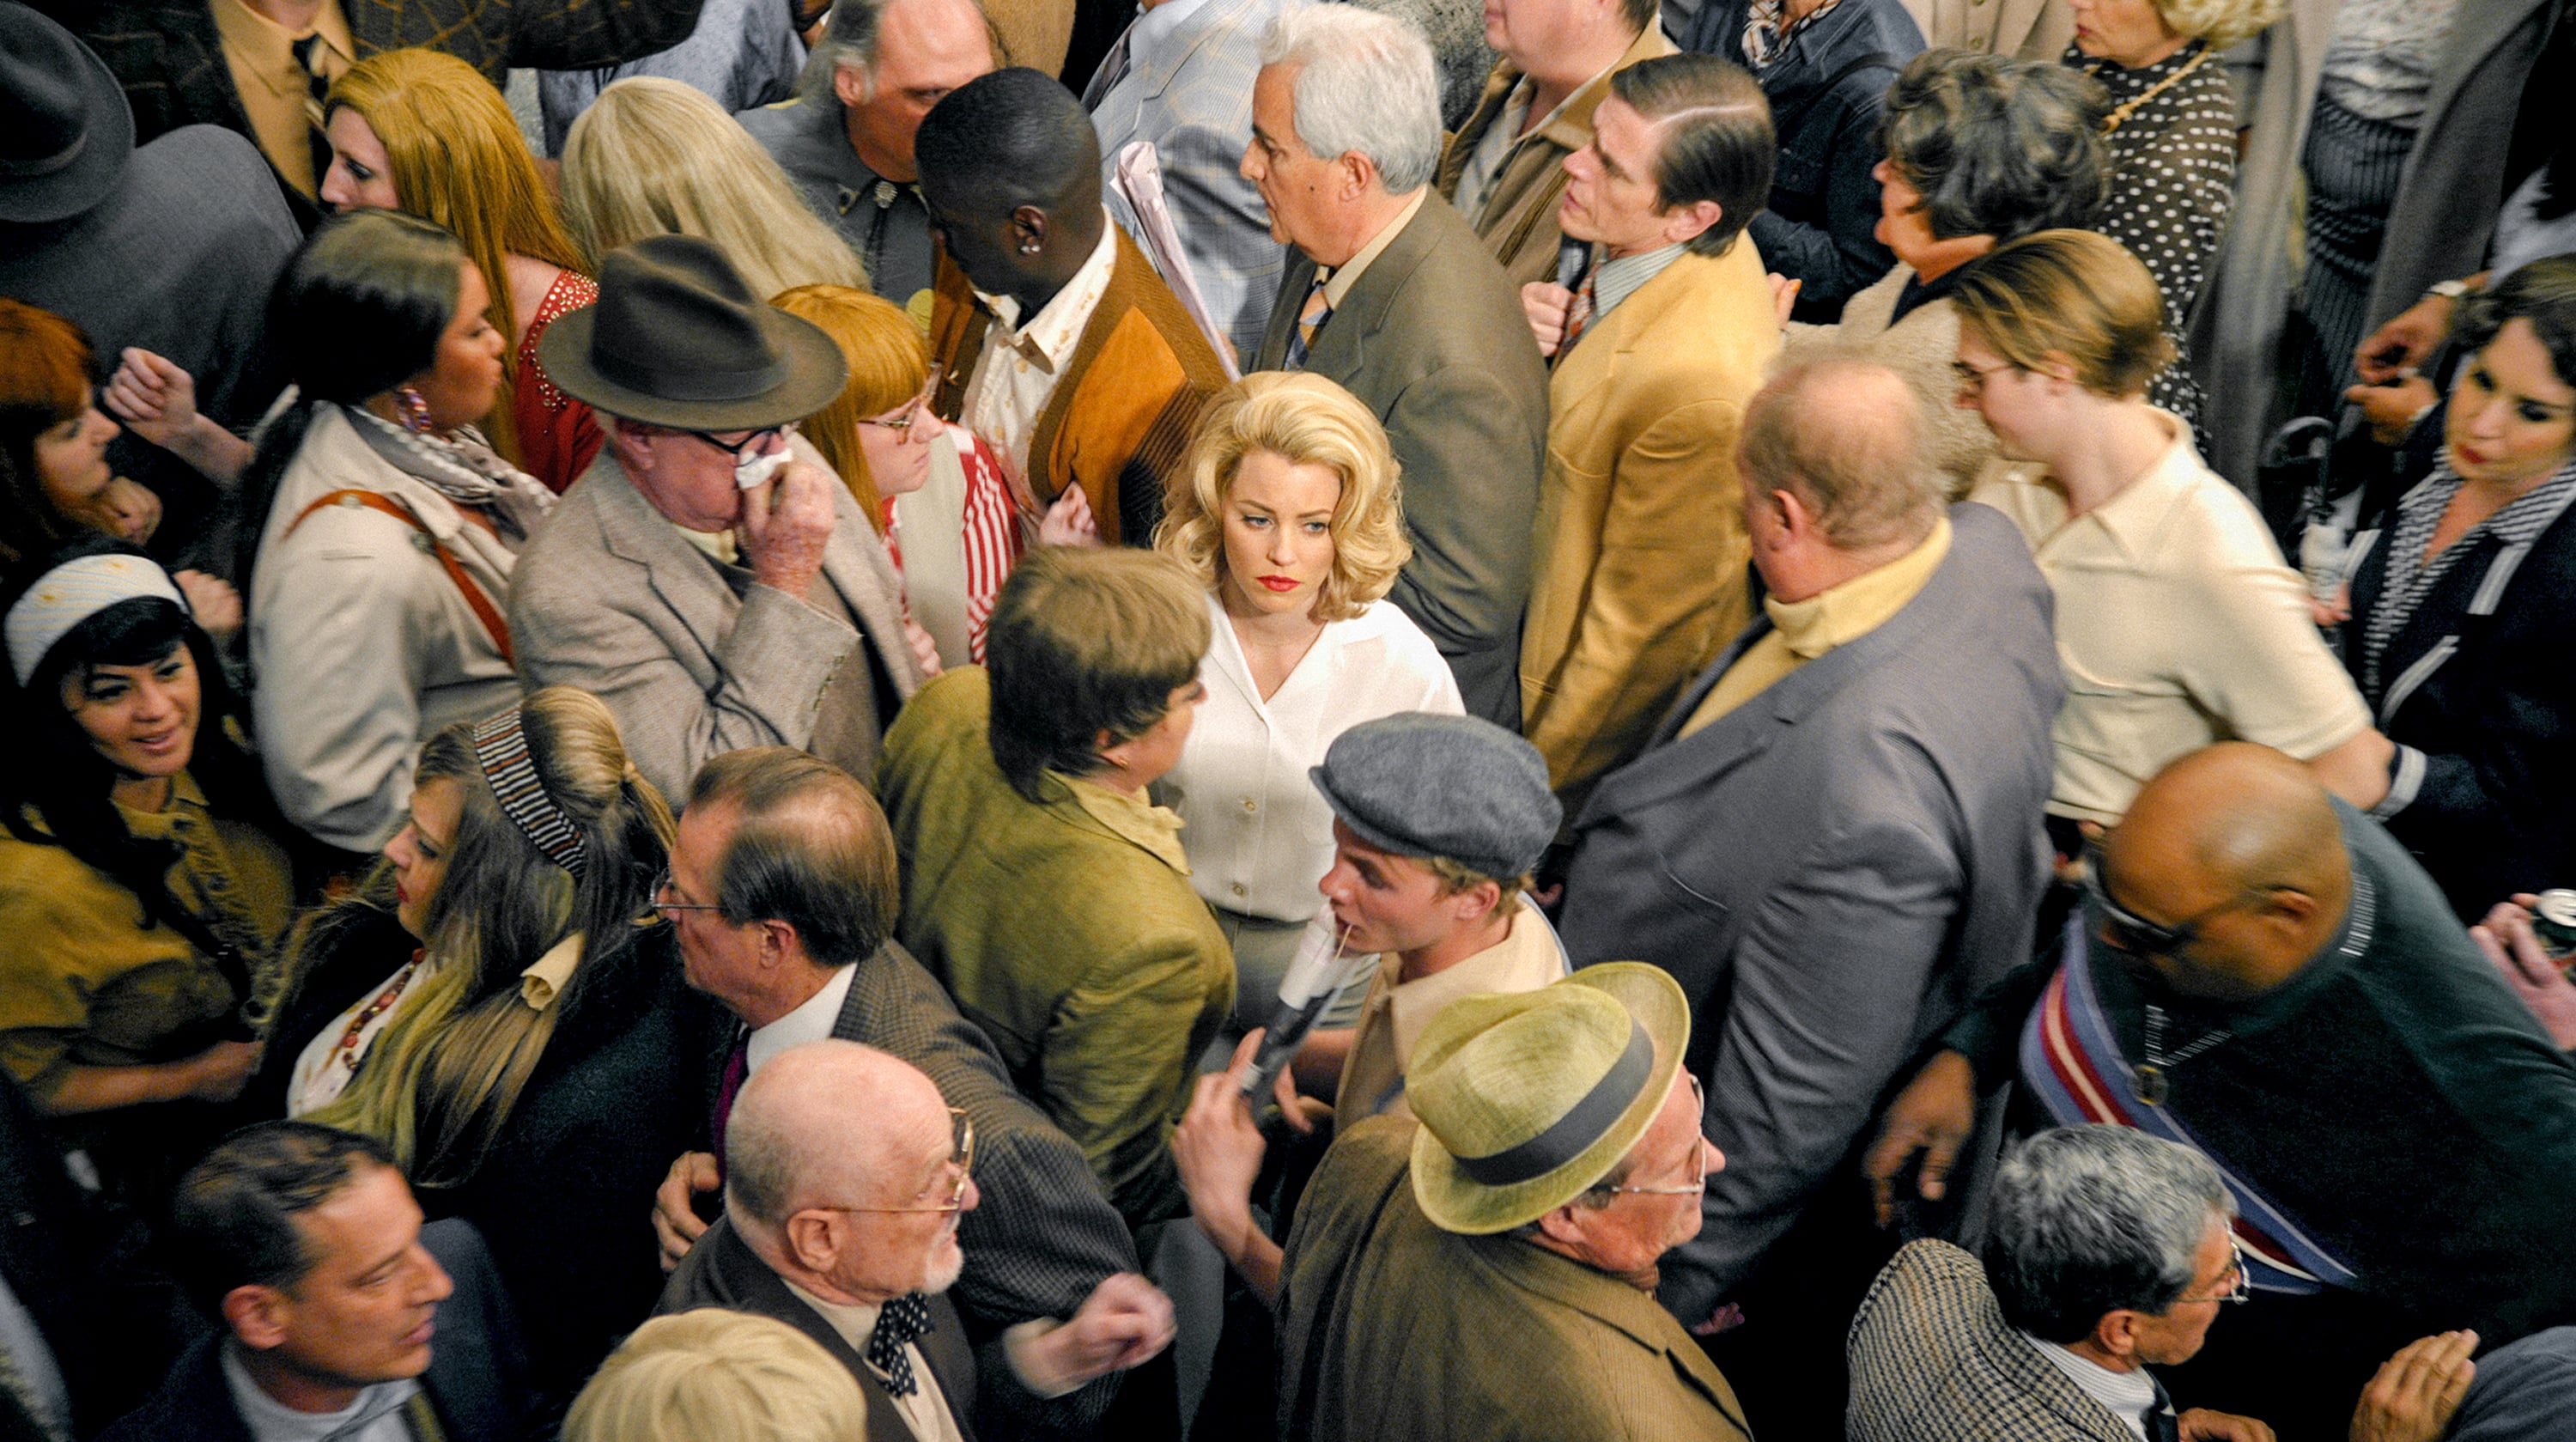 Trailer | FACE IN THE CROWD, 2013 by Alex Prager